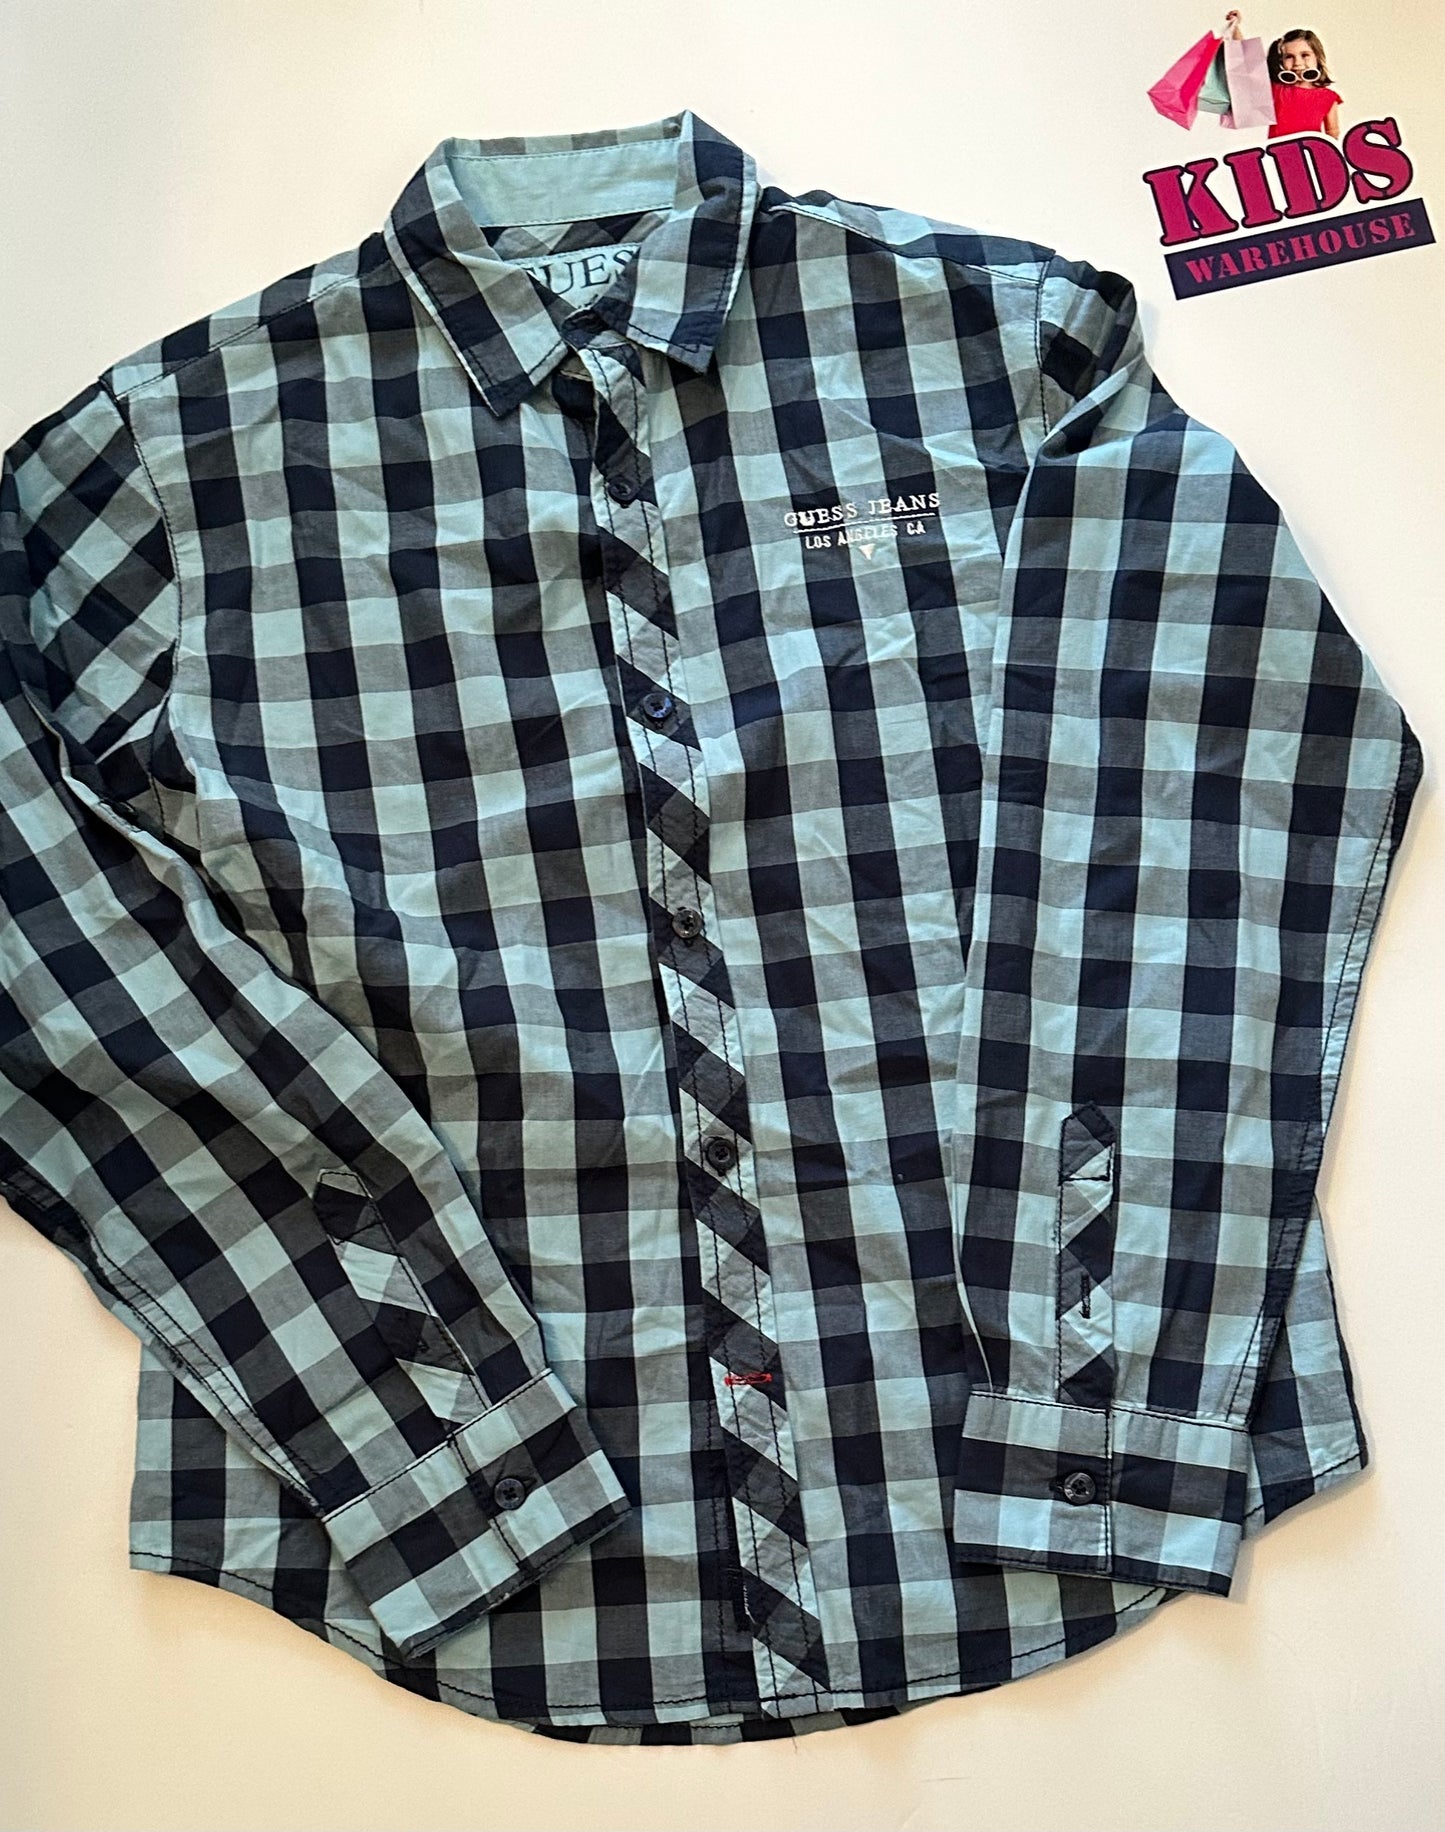 Guess Blue Checked Shirt Size 12/14